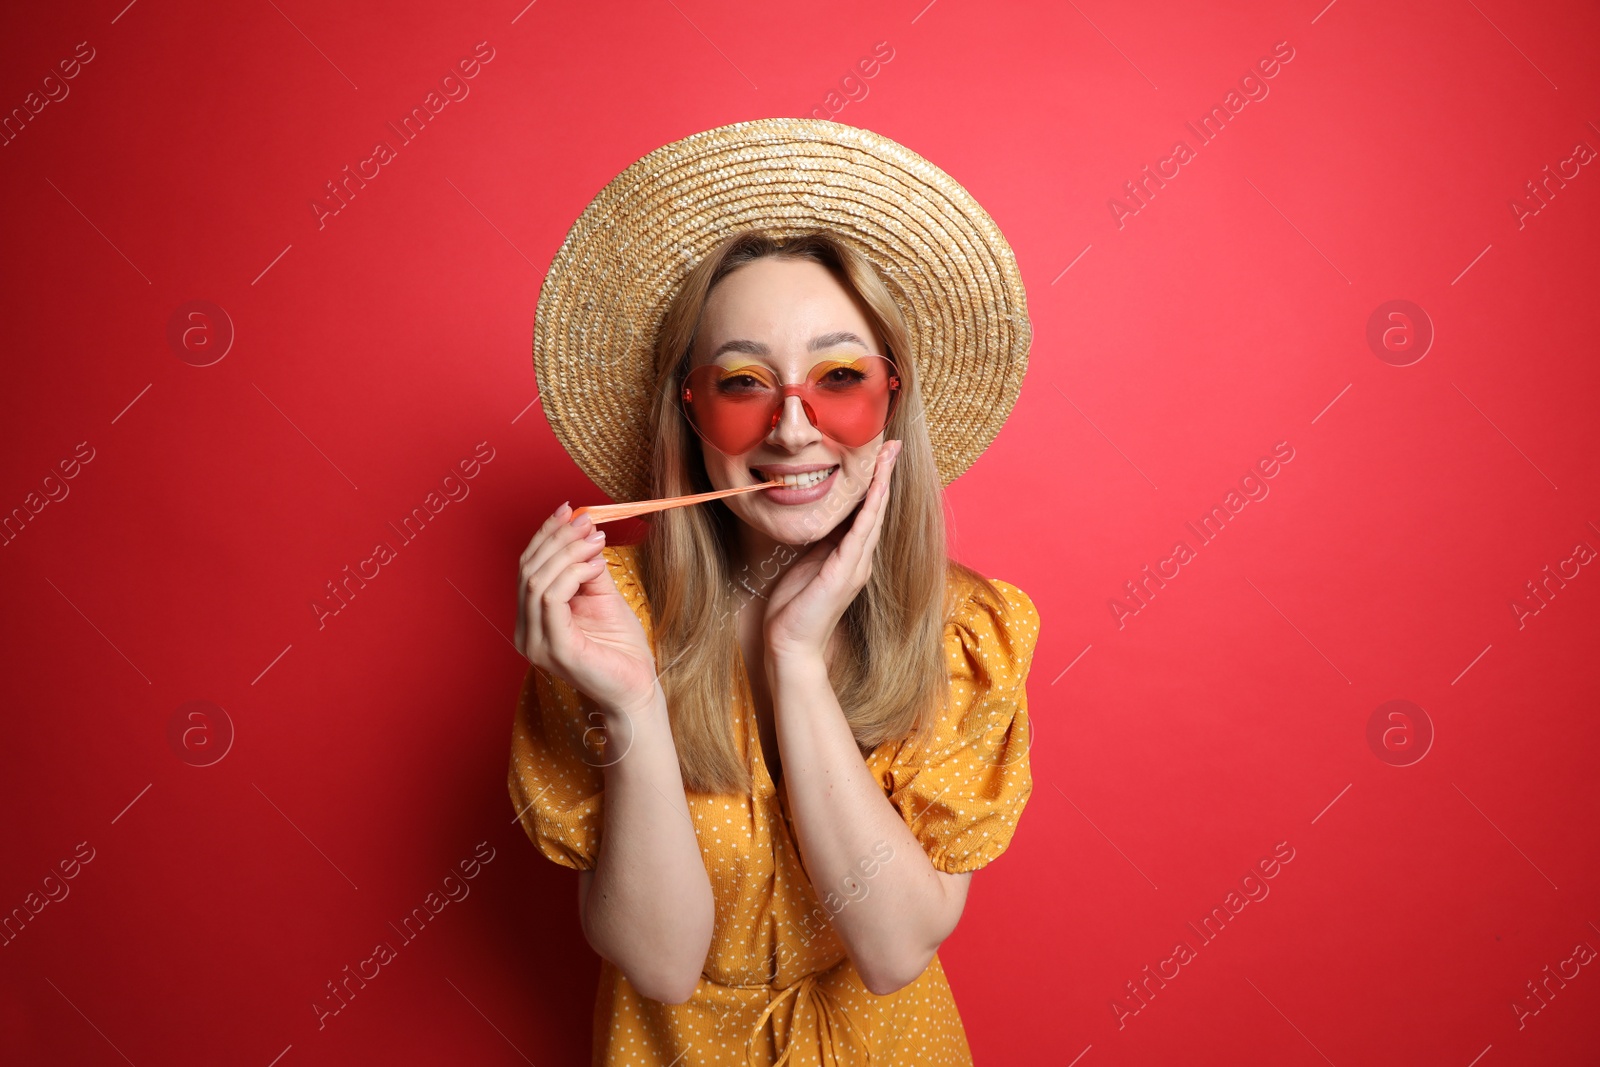 Photo of Fashionable young woman chewing bubblegum on red background